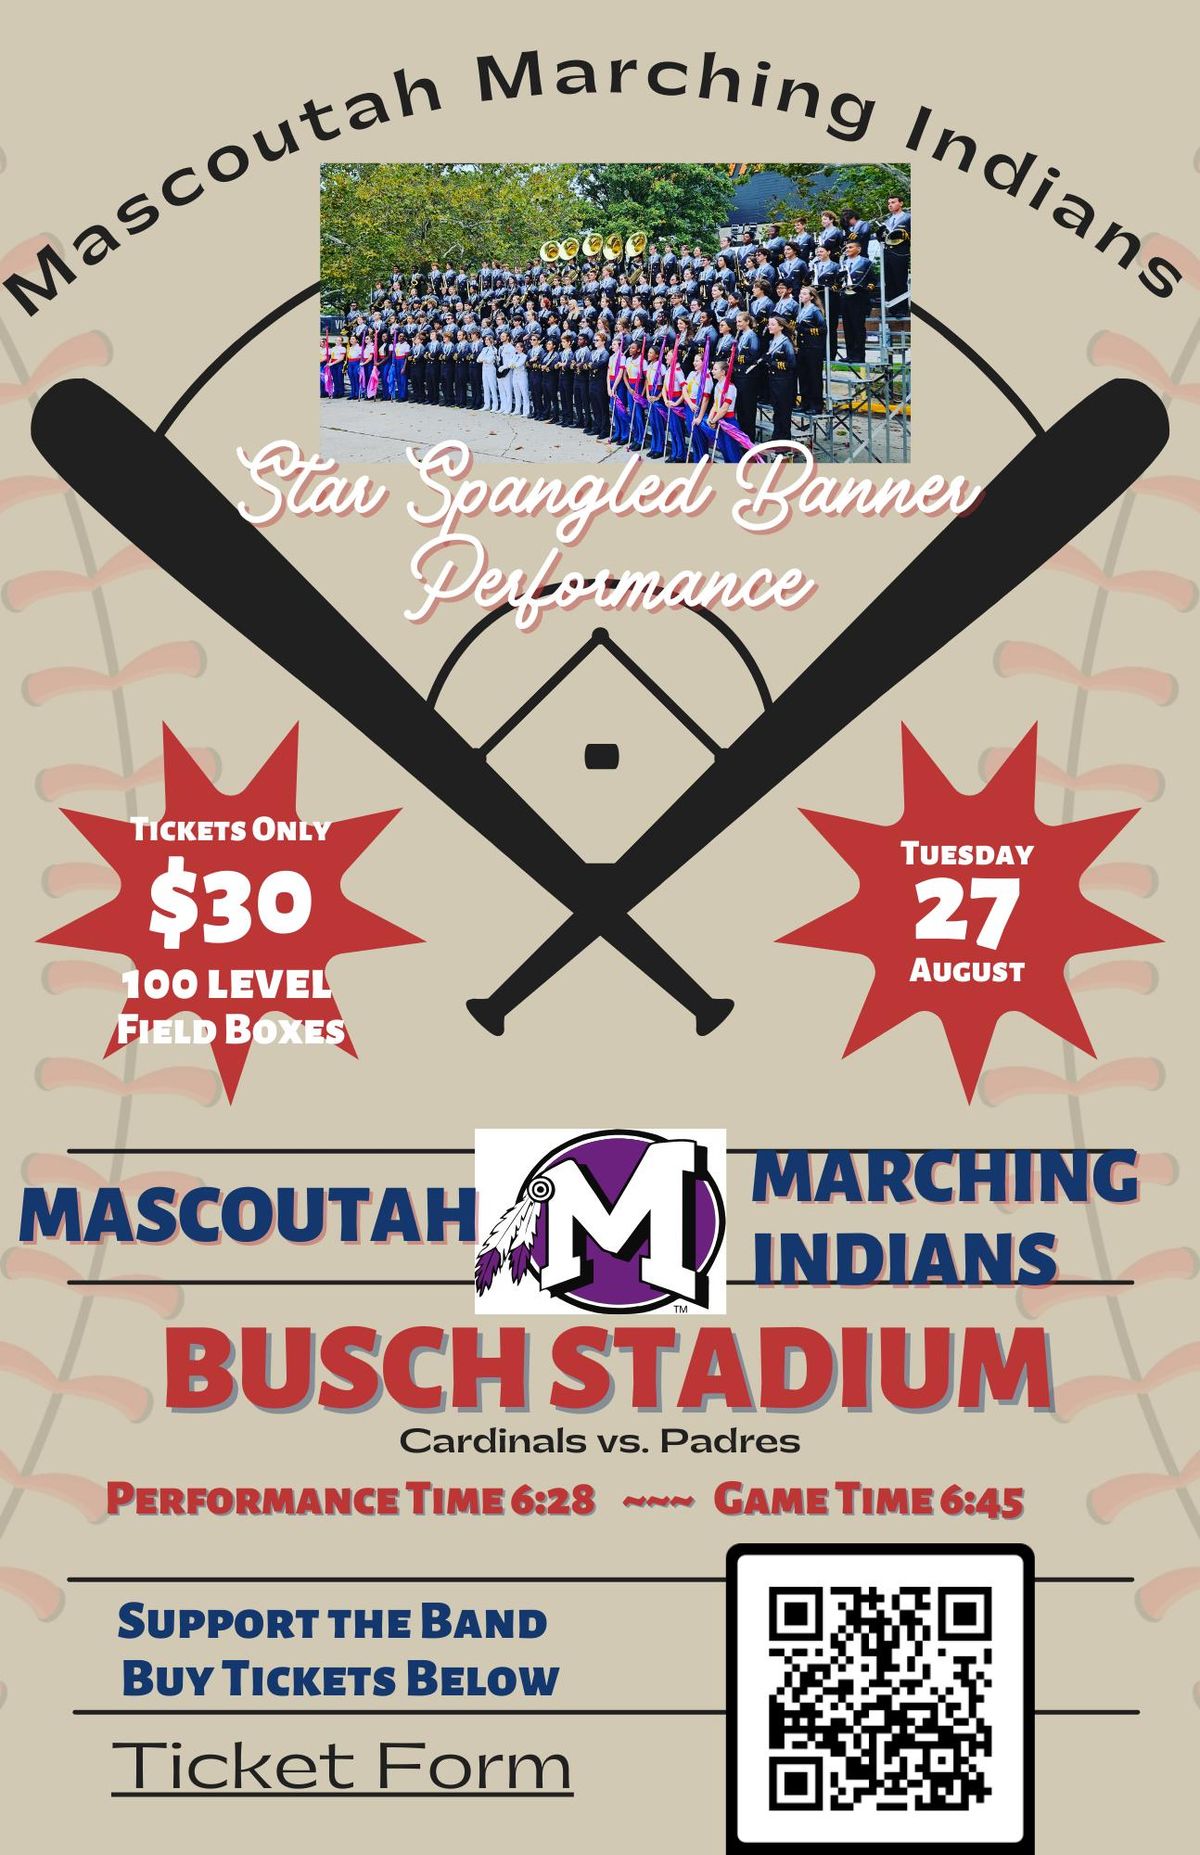 Mascoutah Marching Indians Day at Busch Stadium